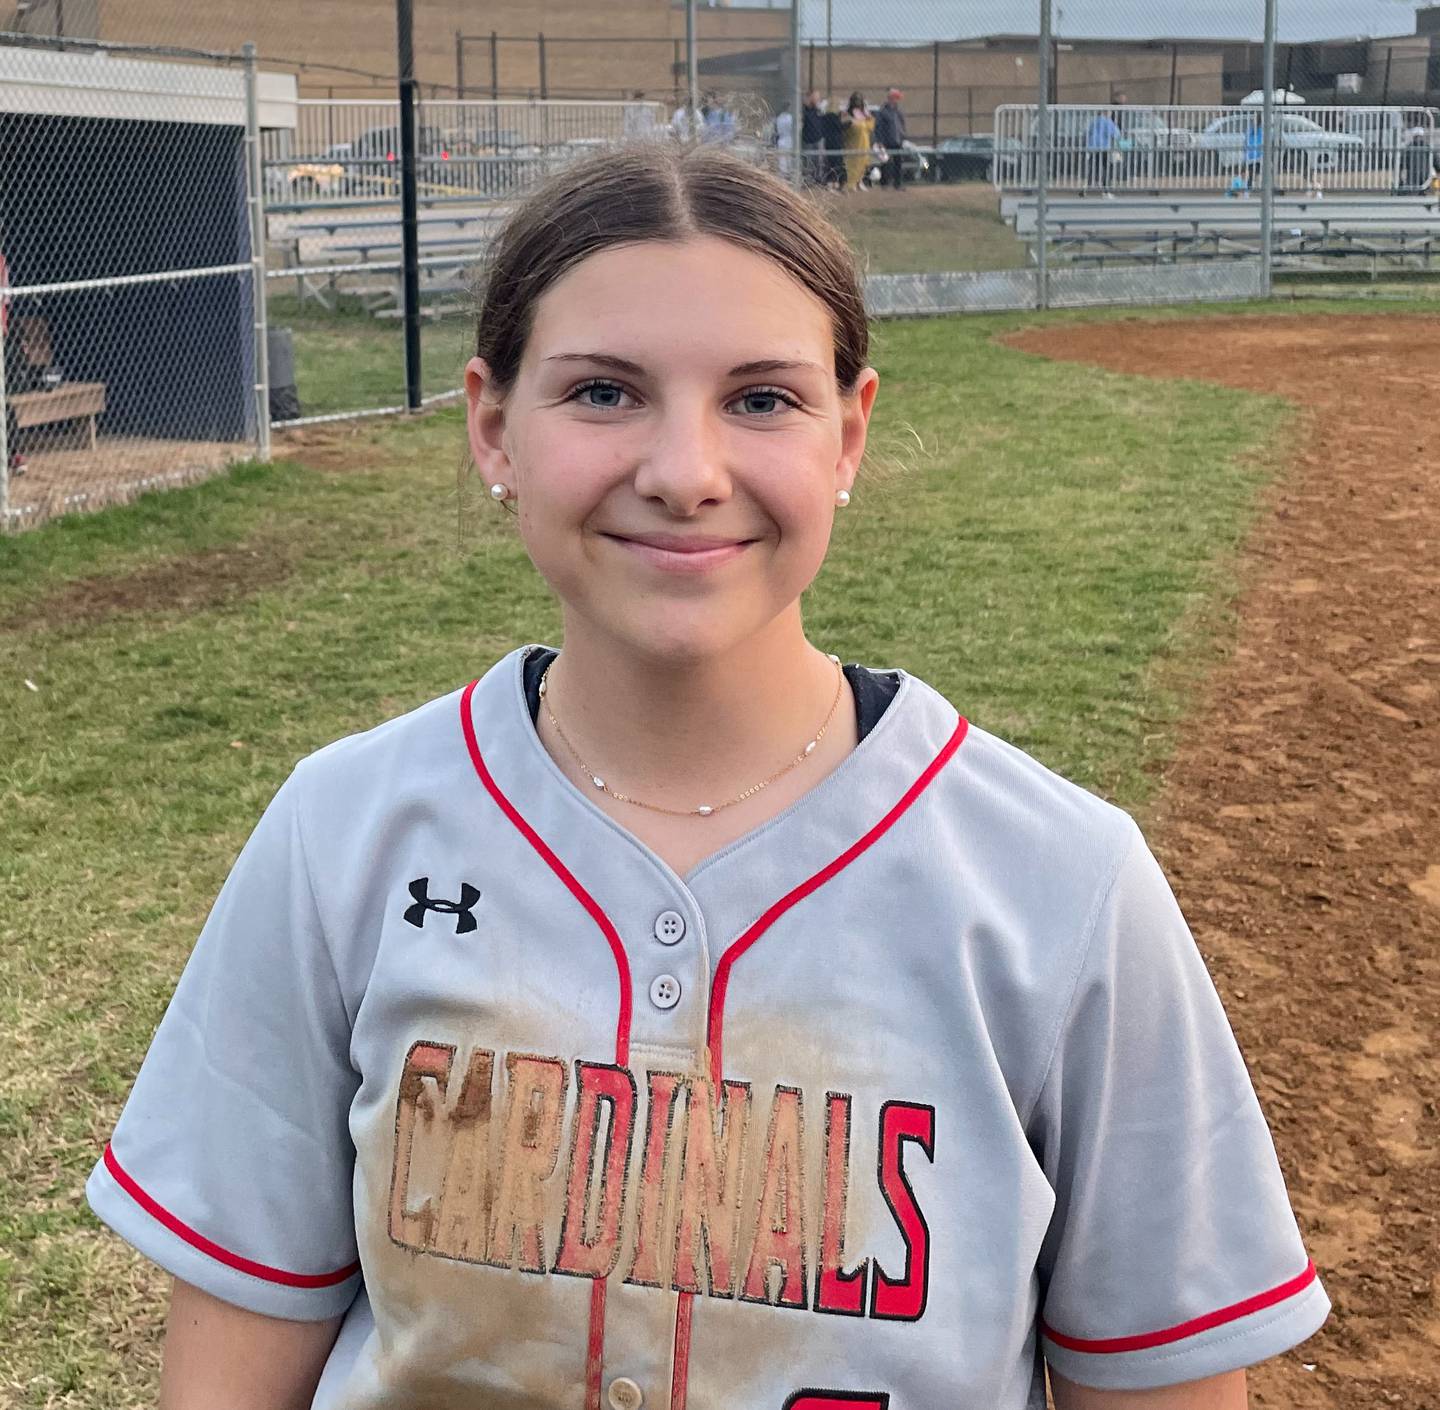 Lynsie Herman came up big in the clutch for Crofton softball Monday afternoon. The junior's RBI single in the top of the sixth inning broke a 4-4 as the No. 4 Cardinals scored the final 8 runs to knock off fifth-ranked Chesapeake-Anne Arundel in an Anne Arundel County contest in Pasadena.